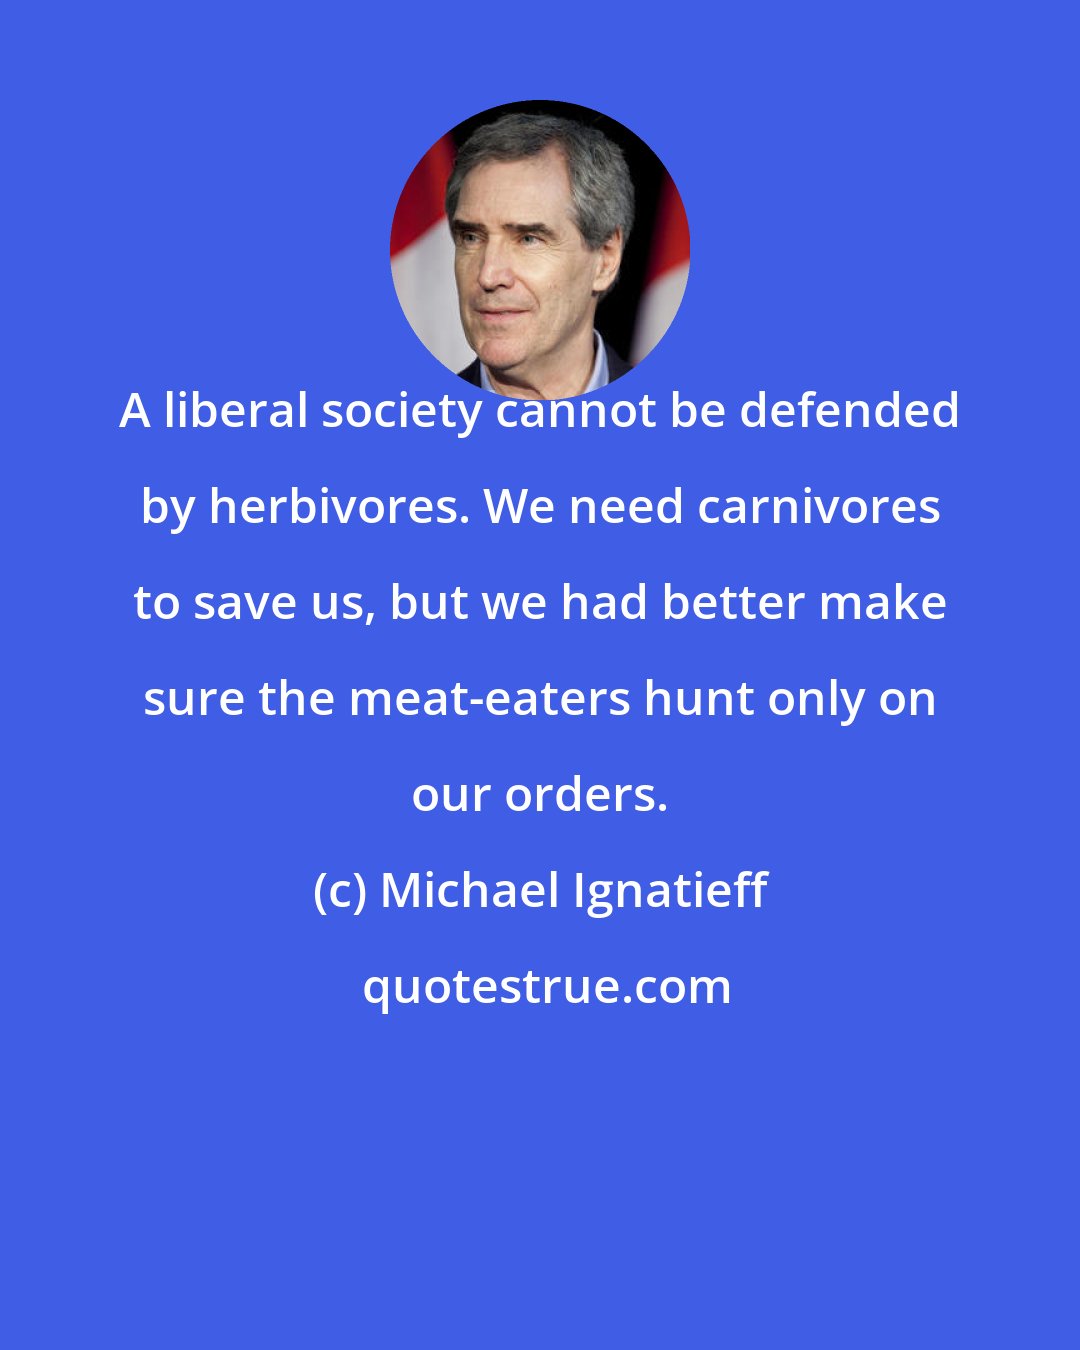 Michael Ignatieff: A liberal society cannot be defended by herbivores. We need carnivores to save us, but we had better make sure the meat-eaters hunt only on our orders.